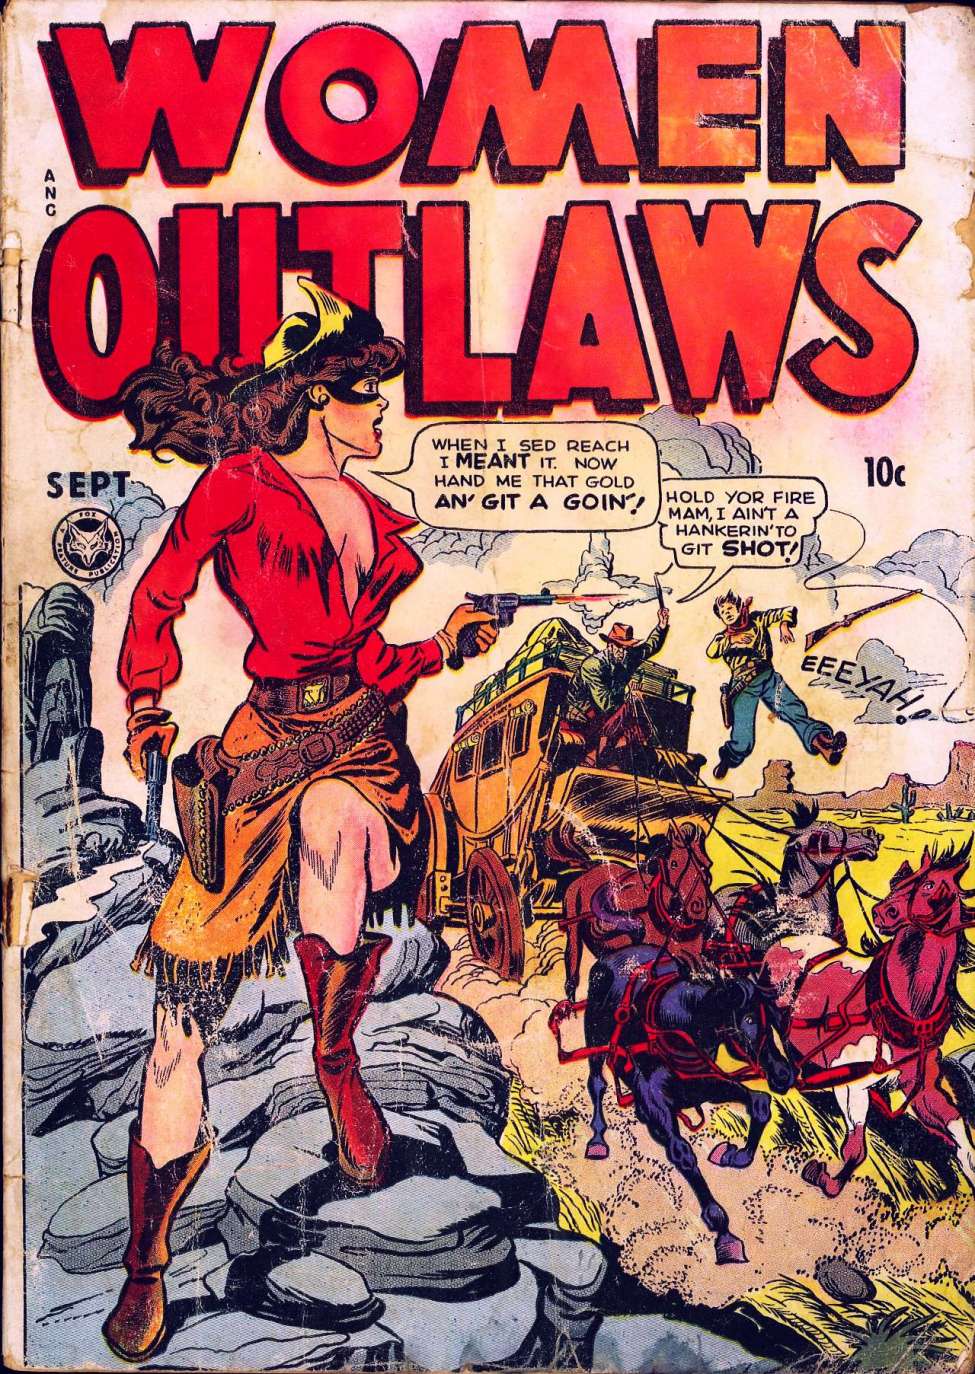 Book Cover For Women Outlaws 2